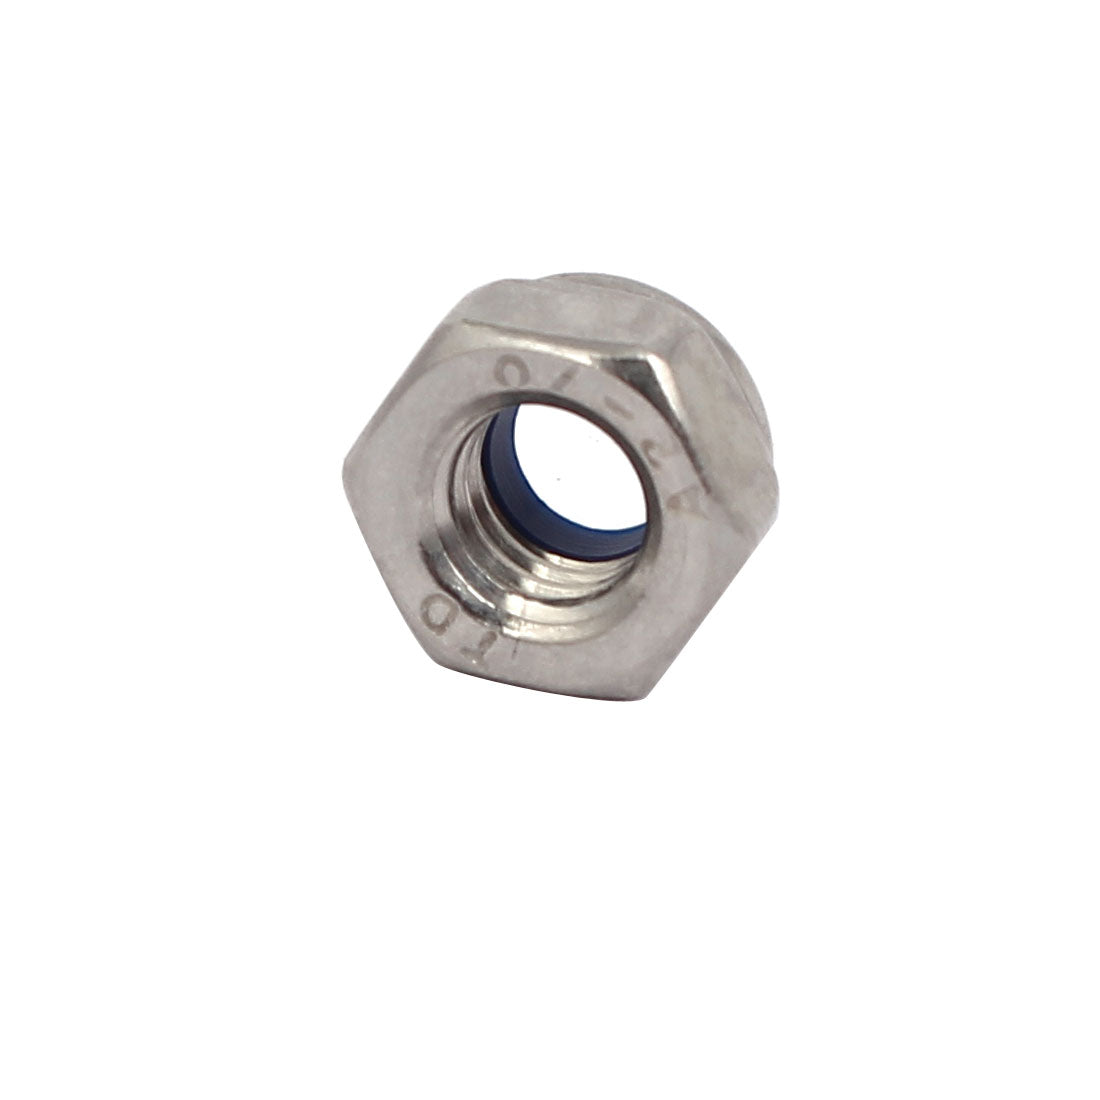 uxcell Uxcell M6 Thread Dia Stainless Steel Self-locking Nylon Insert Lock Hex Nuts 20pcs